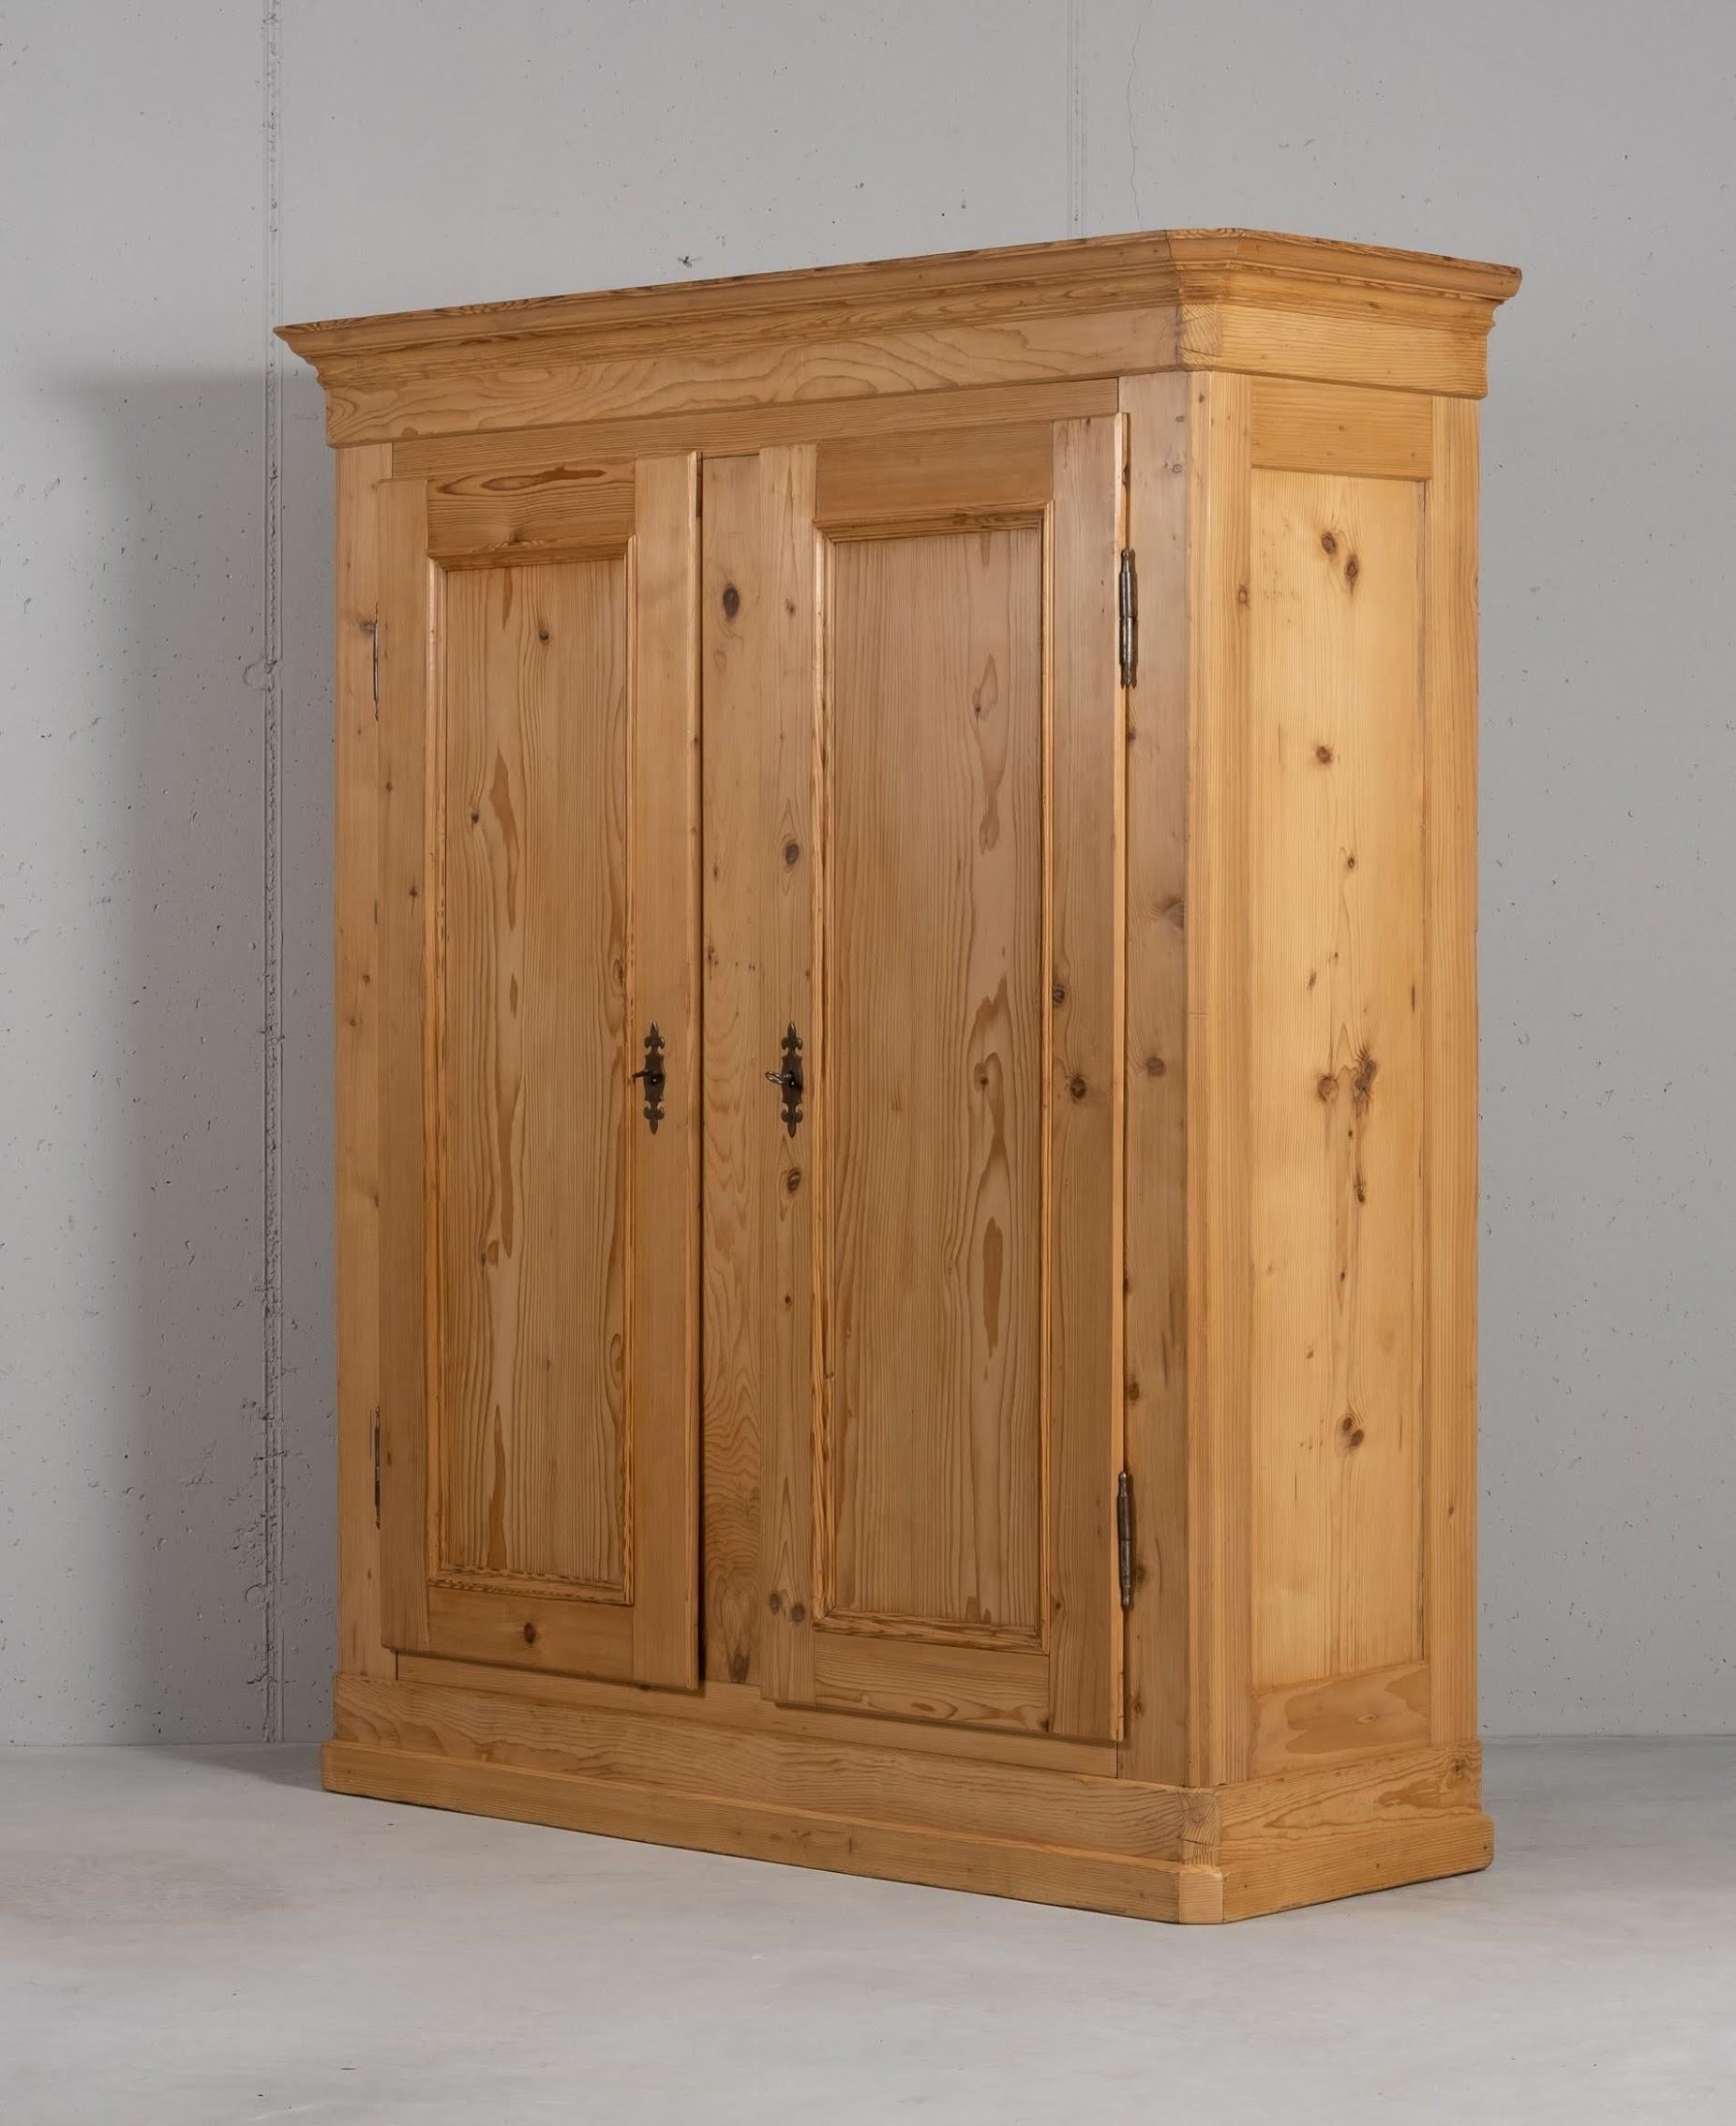 This lovely wardrobe from Swiss has been restored and finished with natural wax, while 
maintaining its original hardware. 
Opening the door on the left you will find very spacious and convenient shelves, while on the right side you can hang